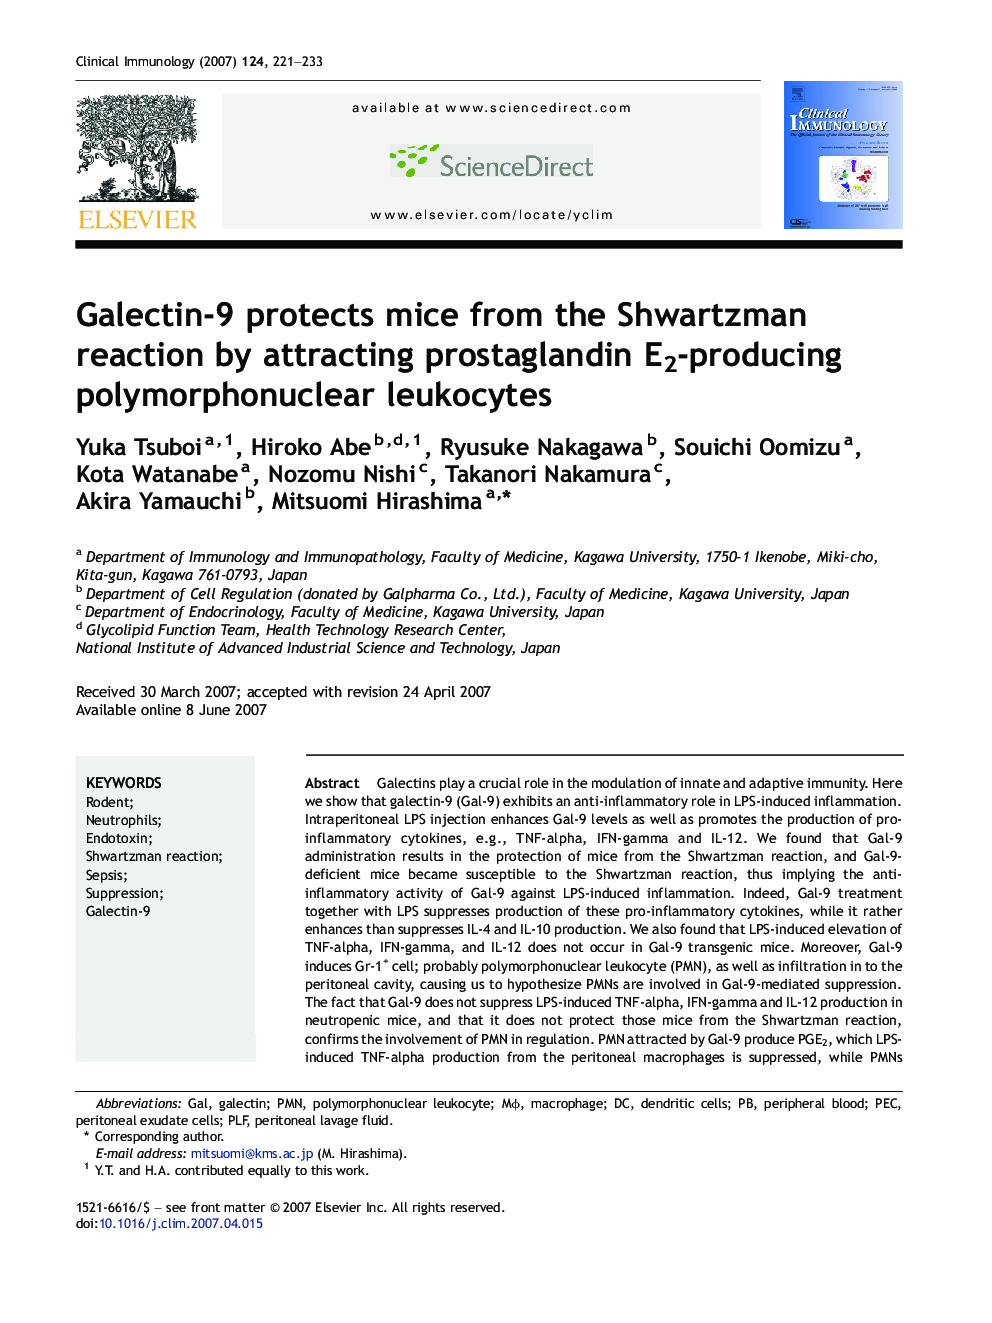 Galectin-9 protects mice from the Shwartzman reaction by attracting prostaglandin E2-producing polymorphonuclear leukocytes